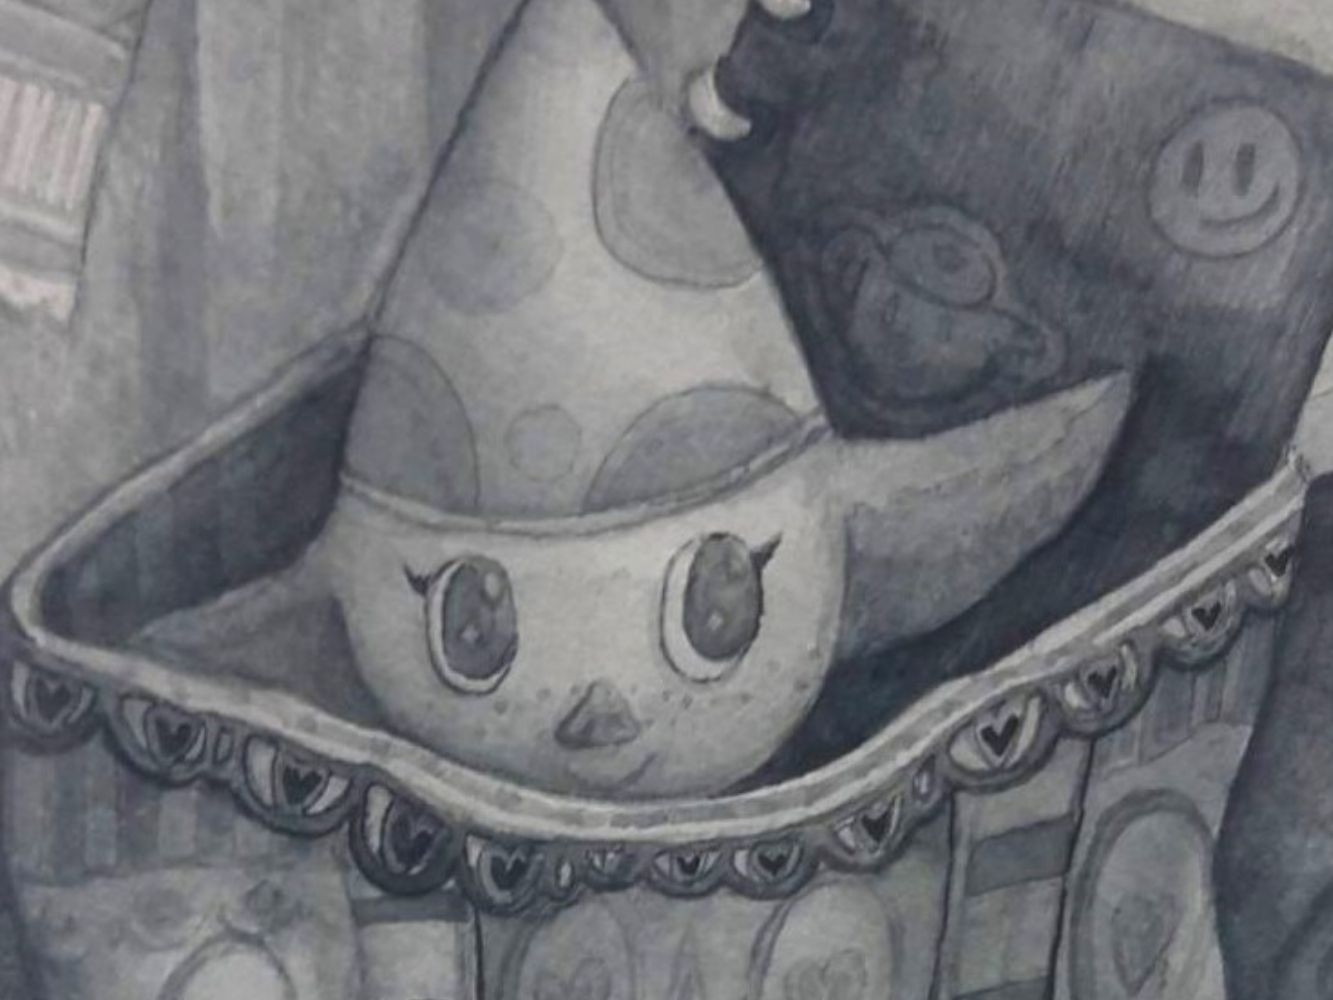 Close up of painting of cartoon-like character wearing a party hat, the character emerges from a decorated box